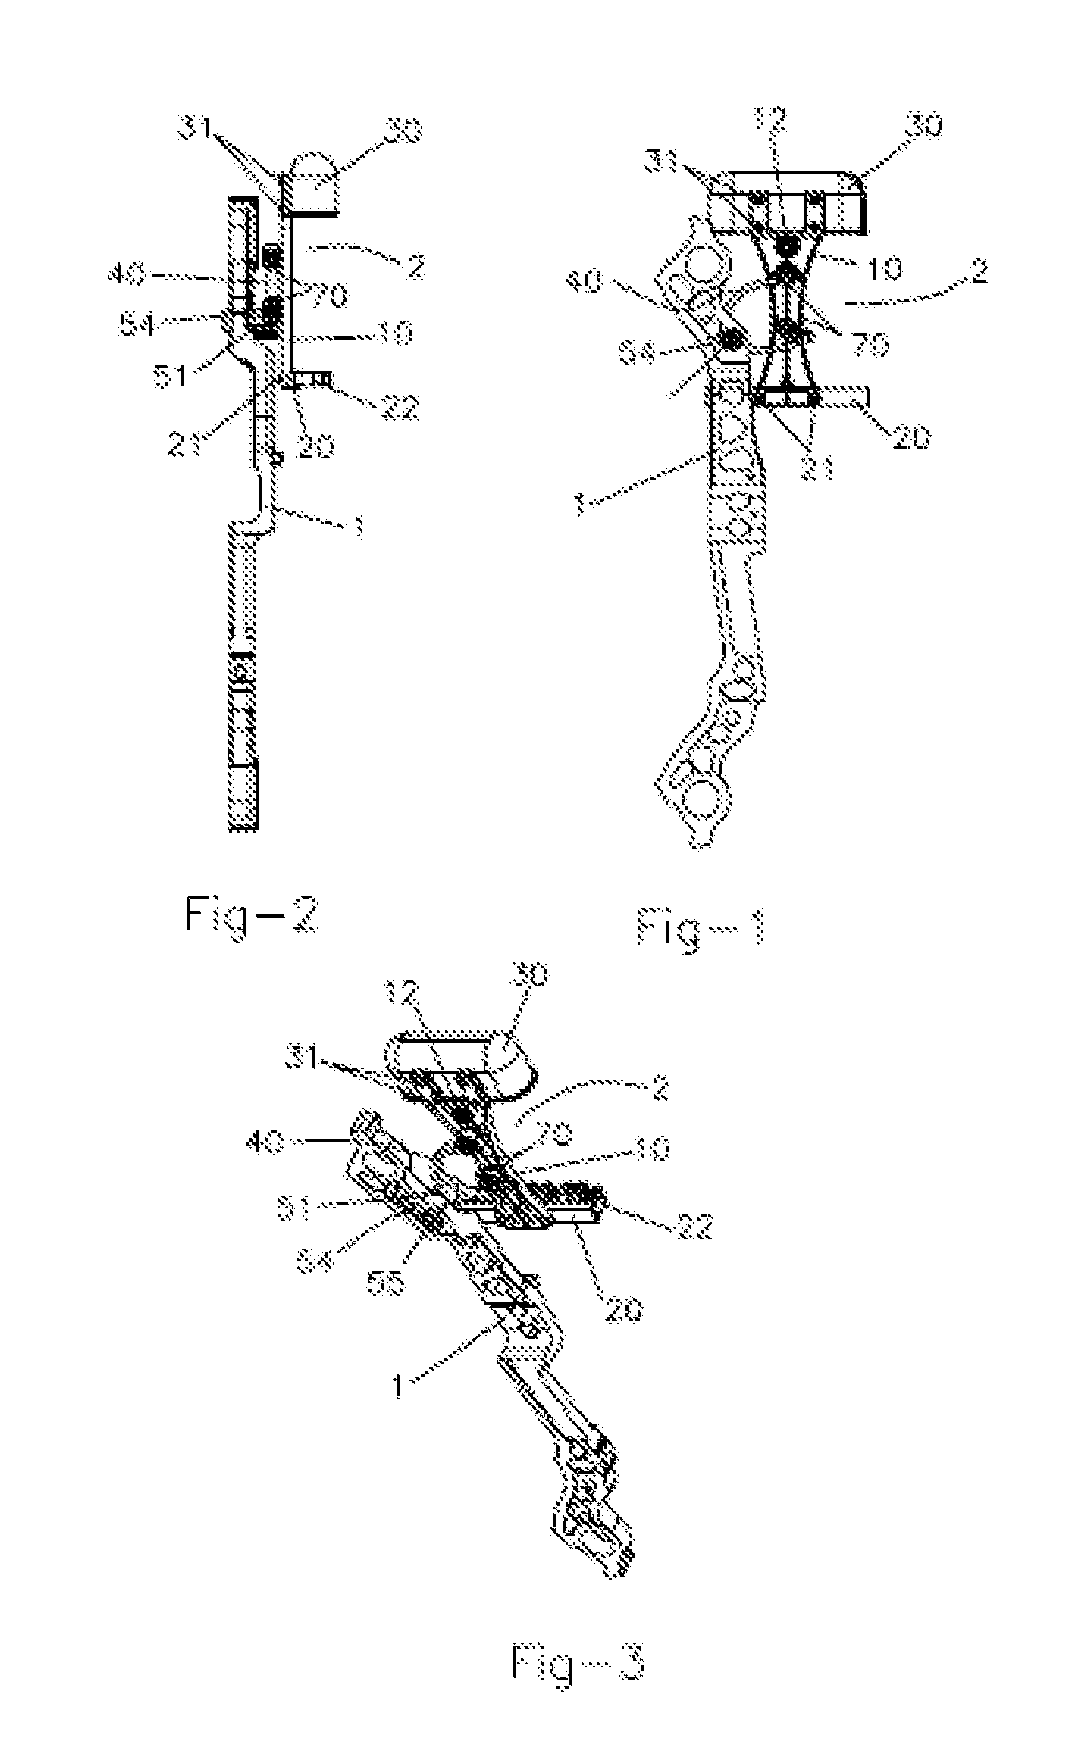 Apparatus And Method For Releasably Mounting An Accessory To An Object Such As For Releasably Mounting An Arrow Quiver To An Archery Bow